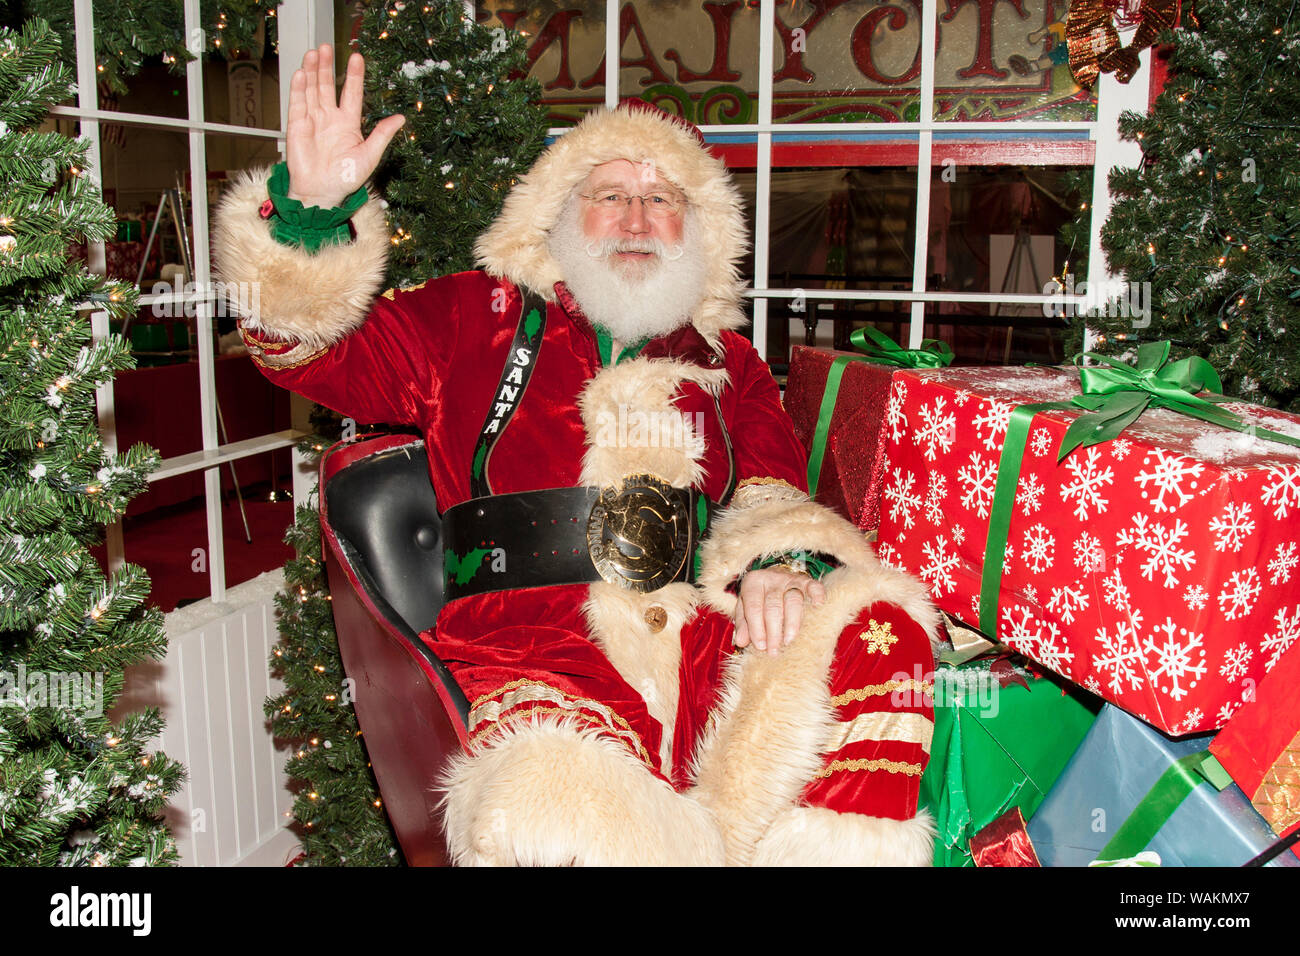 Santa Claus sitting in his sleigh surrounded by wrapped gifts and waving. (MR) Stock Photo